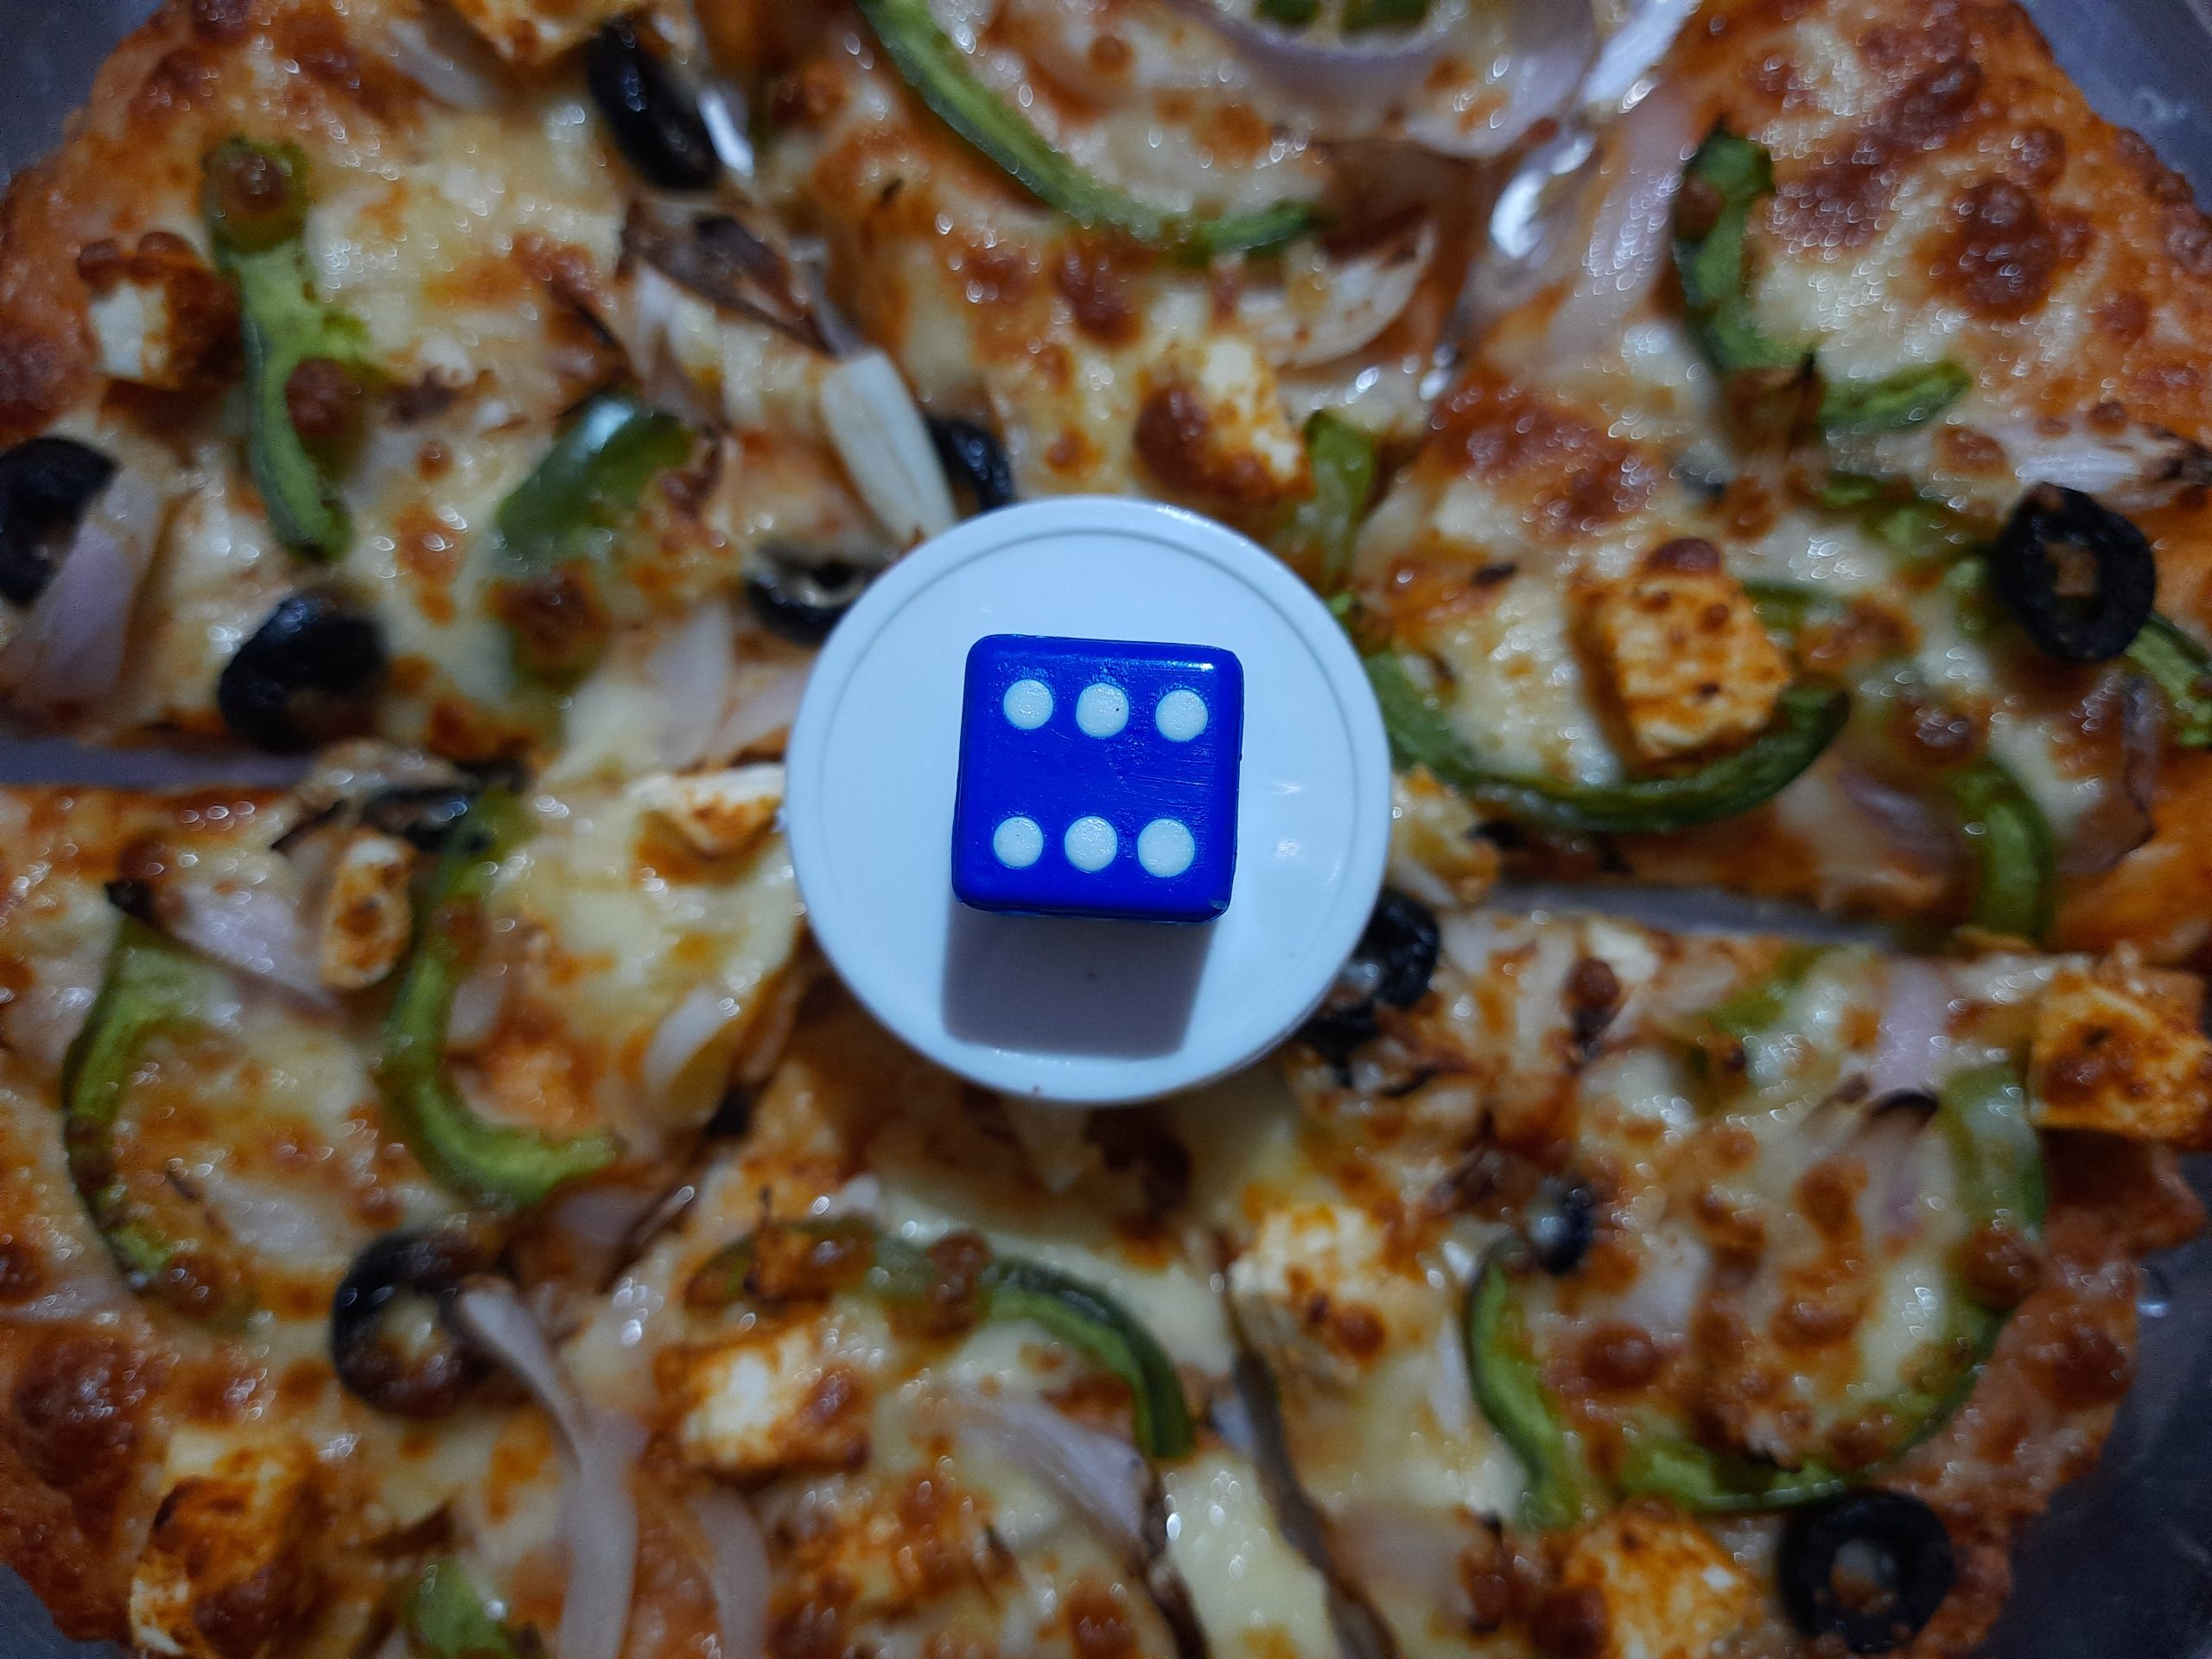 A dice on pizza